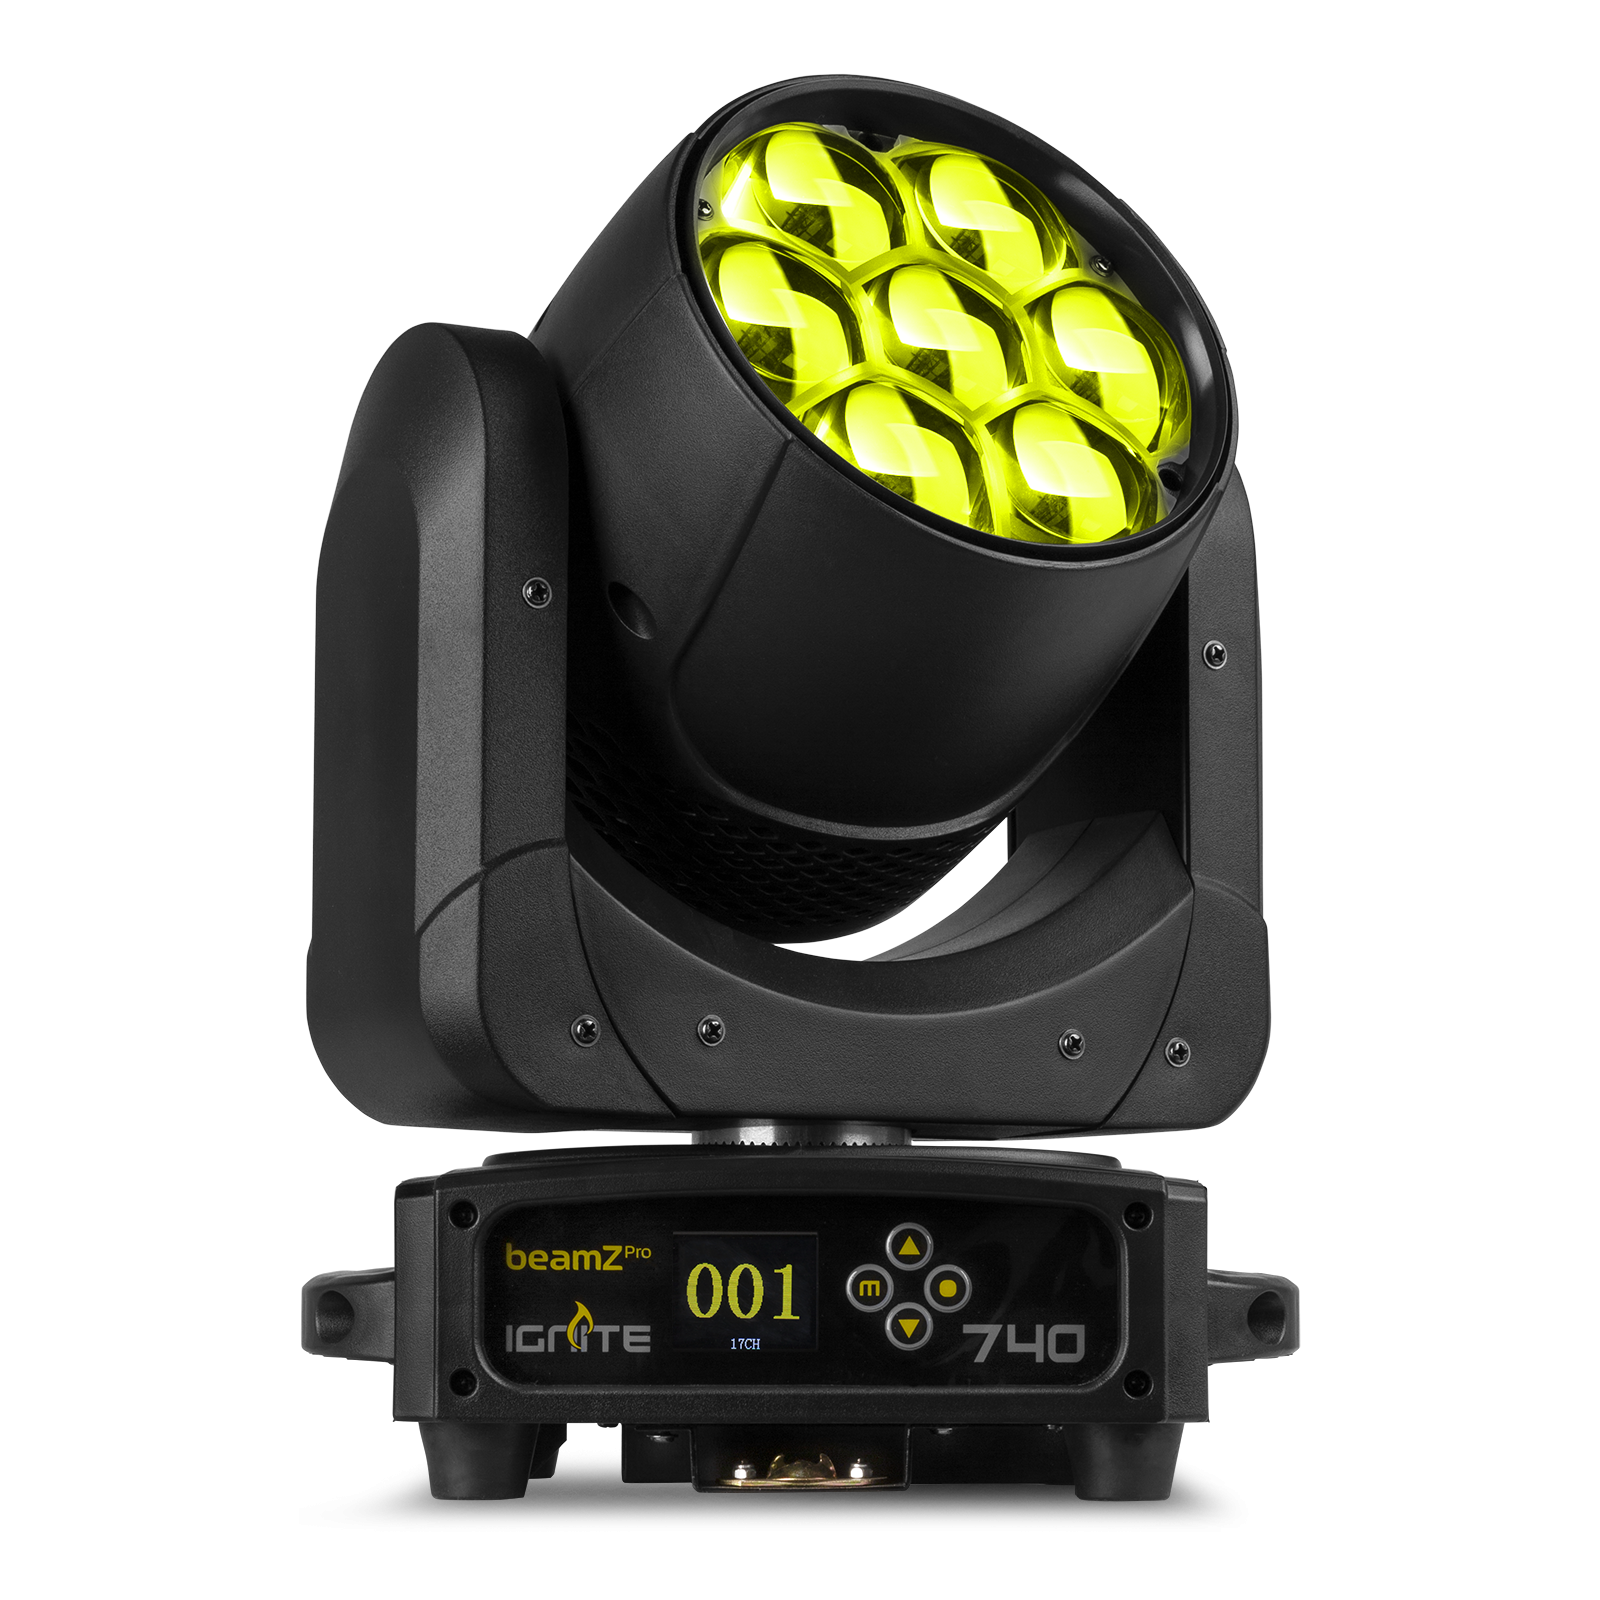 IGNITE740 LED Wash Moving Head with Zoom - beamZ